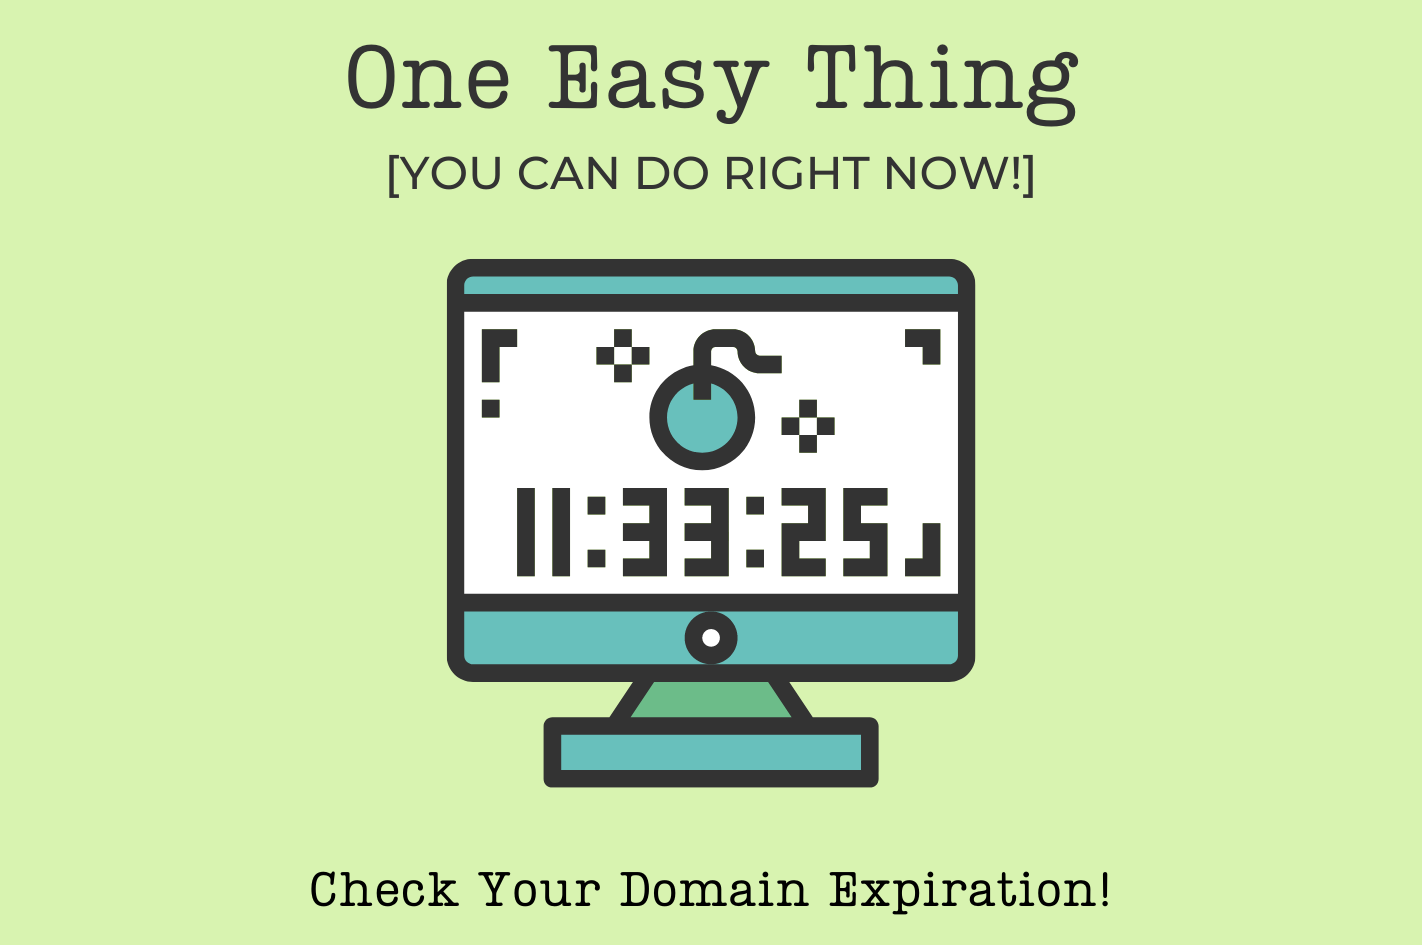 One Easy Thing (You Can Do Right Now): Check Your Domain Expiration!